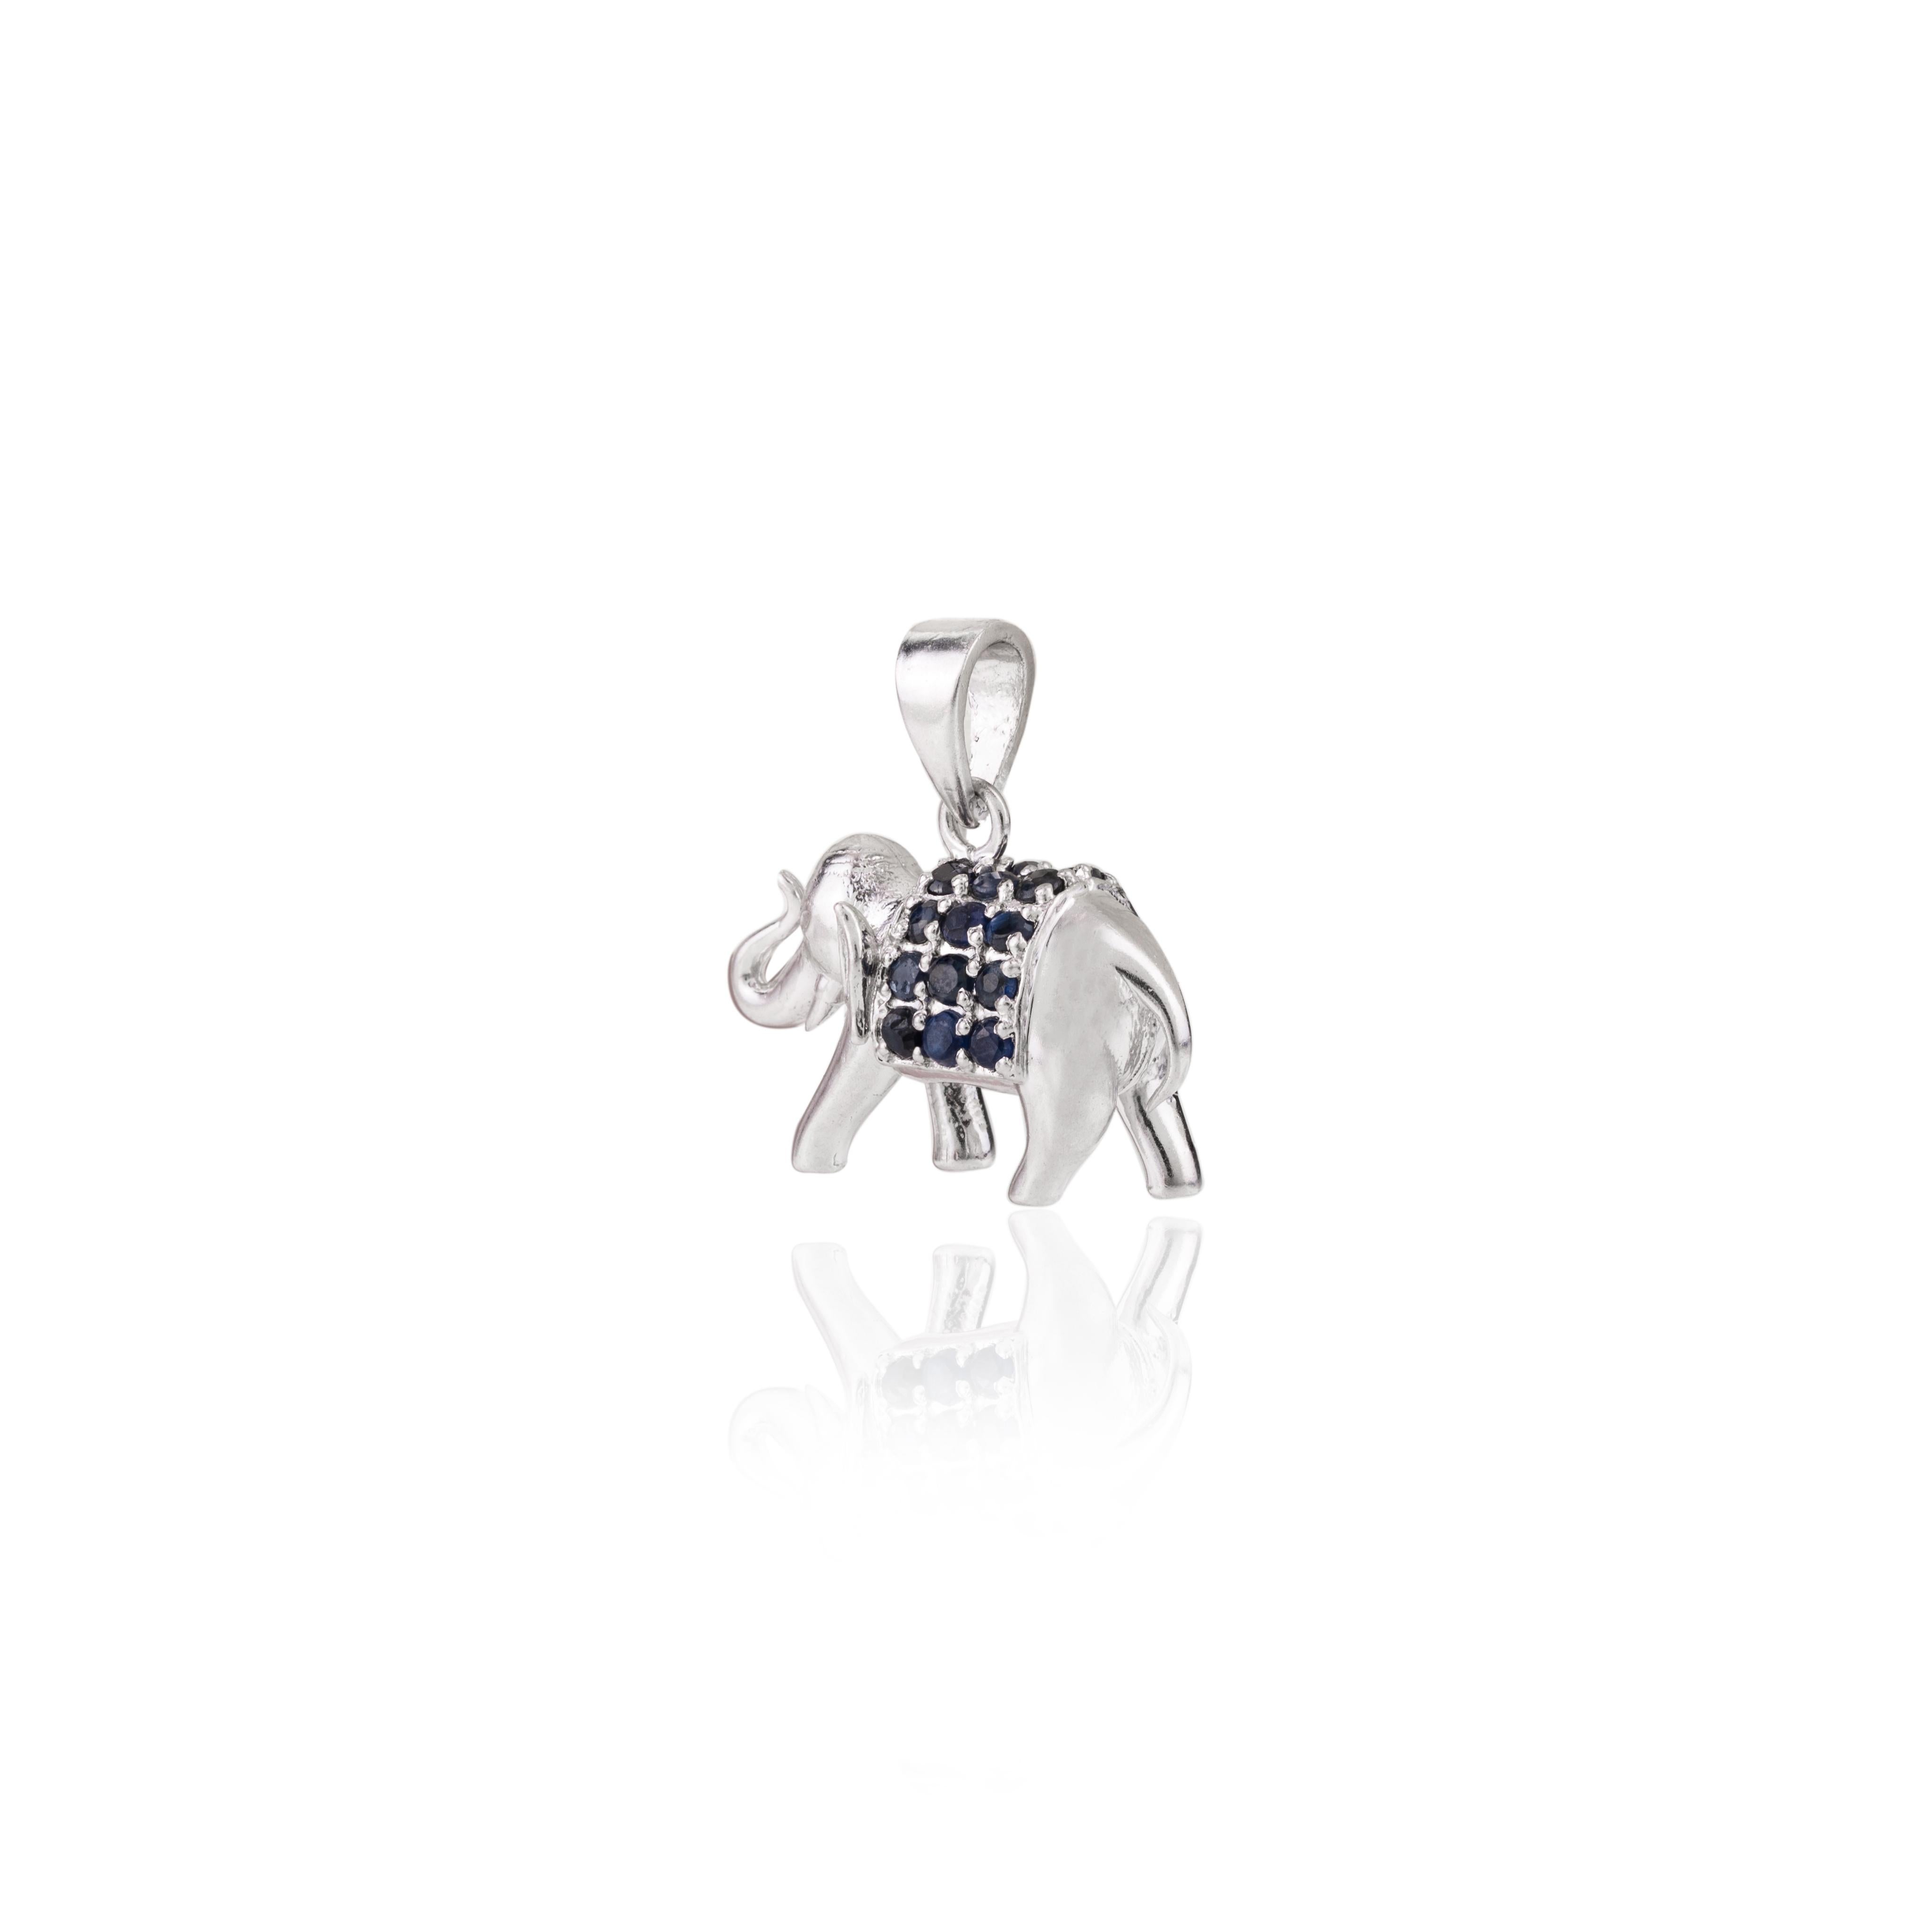 This Unique Blue Sapphire Elephant Pendant is meticulously crafted from the finest materials and adorned with stunning sapphire which helps in relieving stress, anxiety and depression.
This delicate to statement pendants, suits every style and